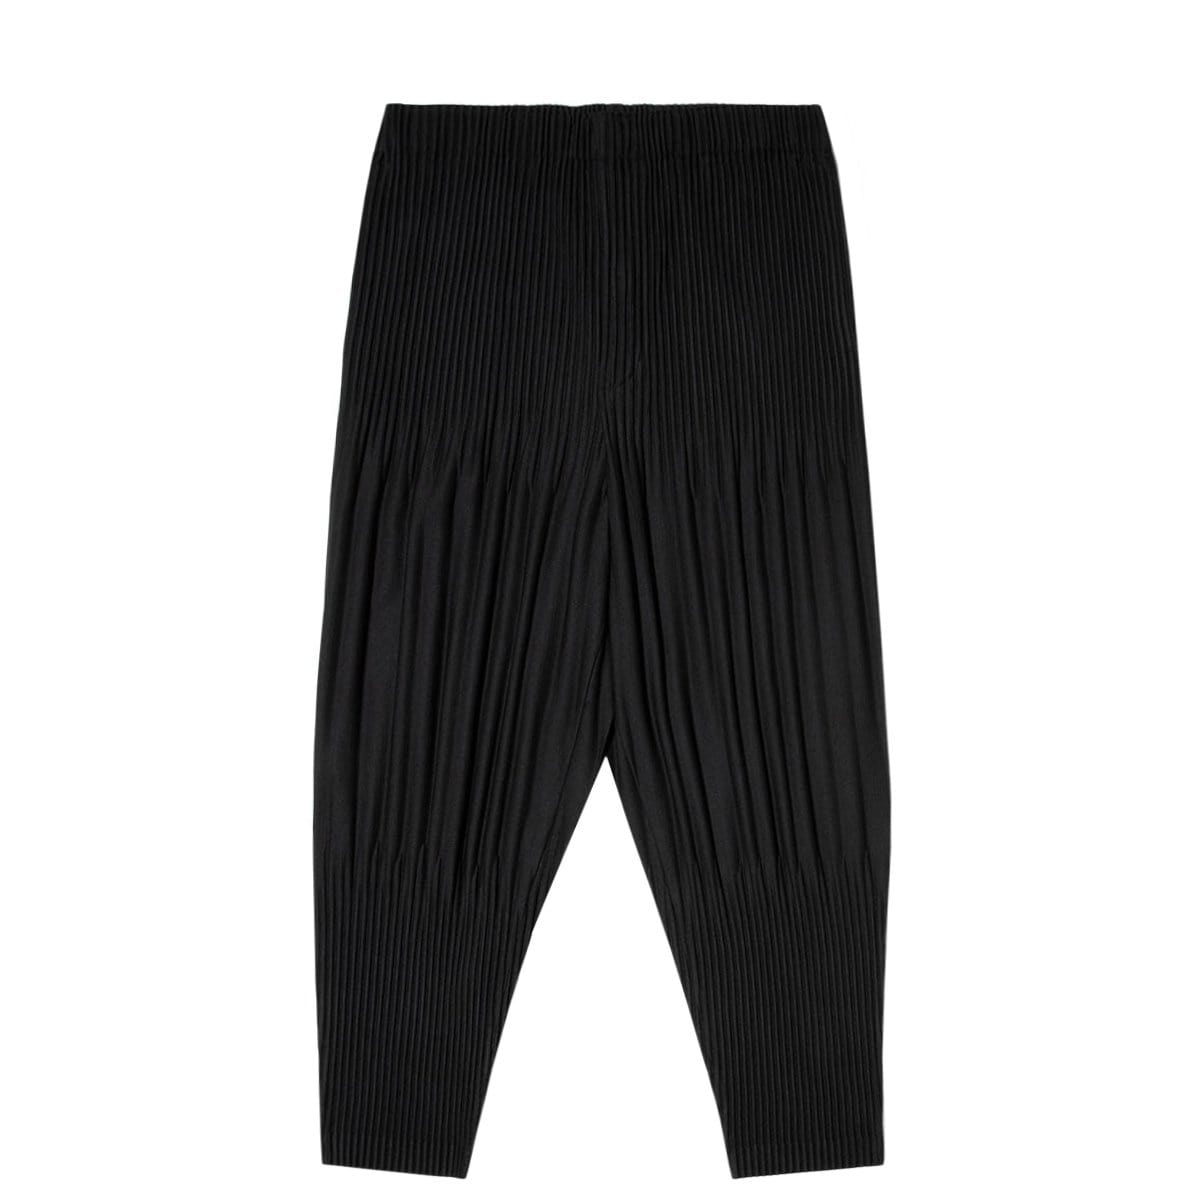 Homme Plisse Issey Miyake Men's Basic Pleated Trousers